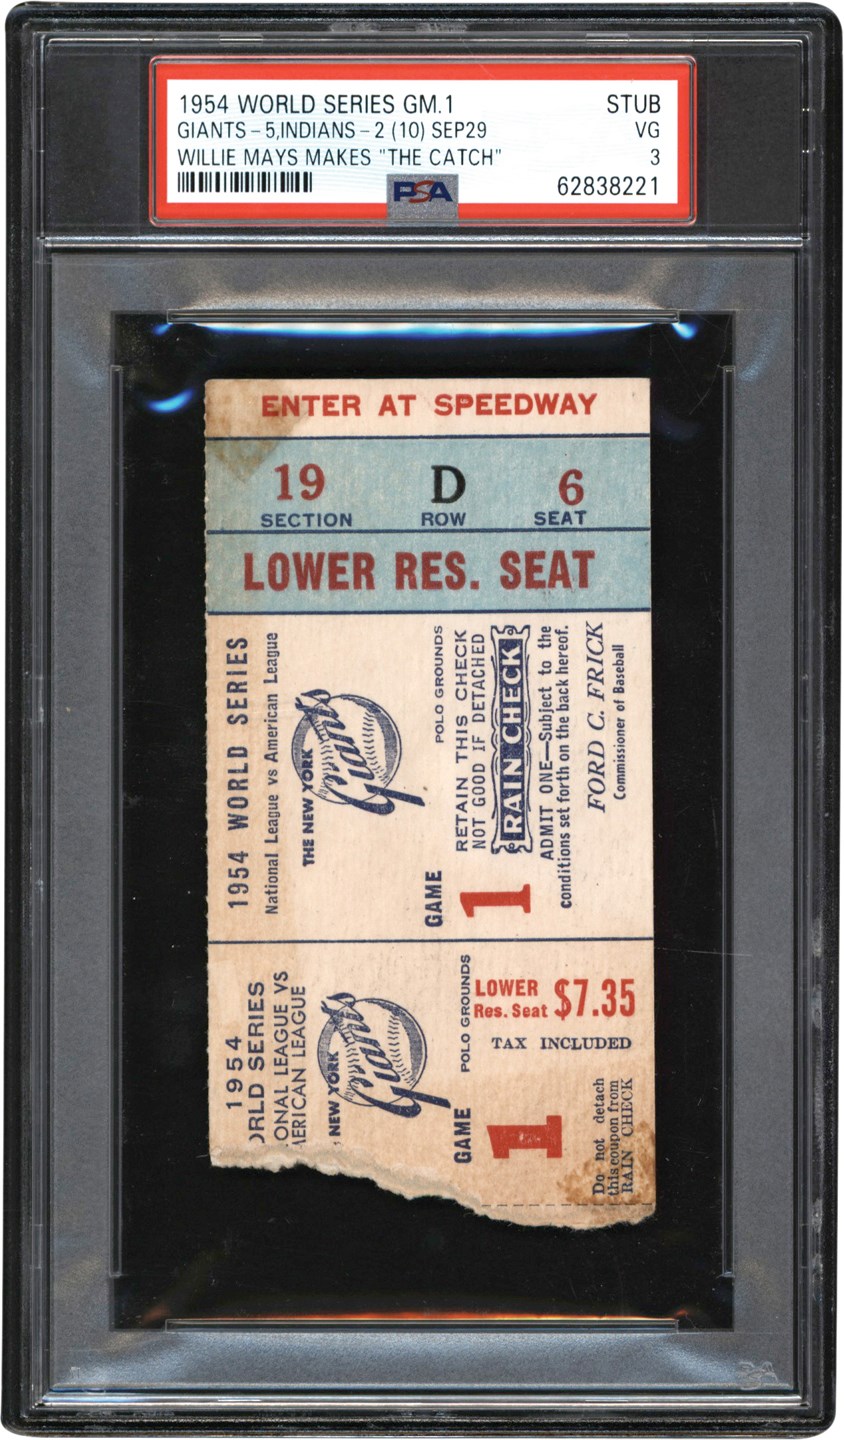 Tickets, Publications & Pins - 1954 World Series Ticket Stub Game 1 - Willie Mays "The Catch" Game! PSA VG 3